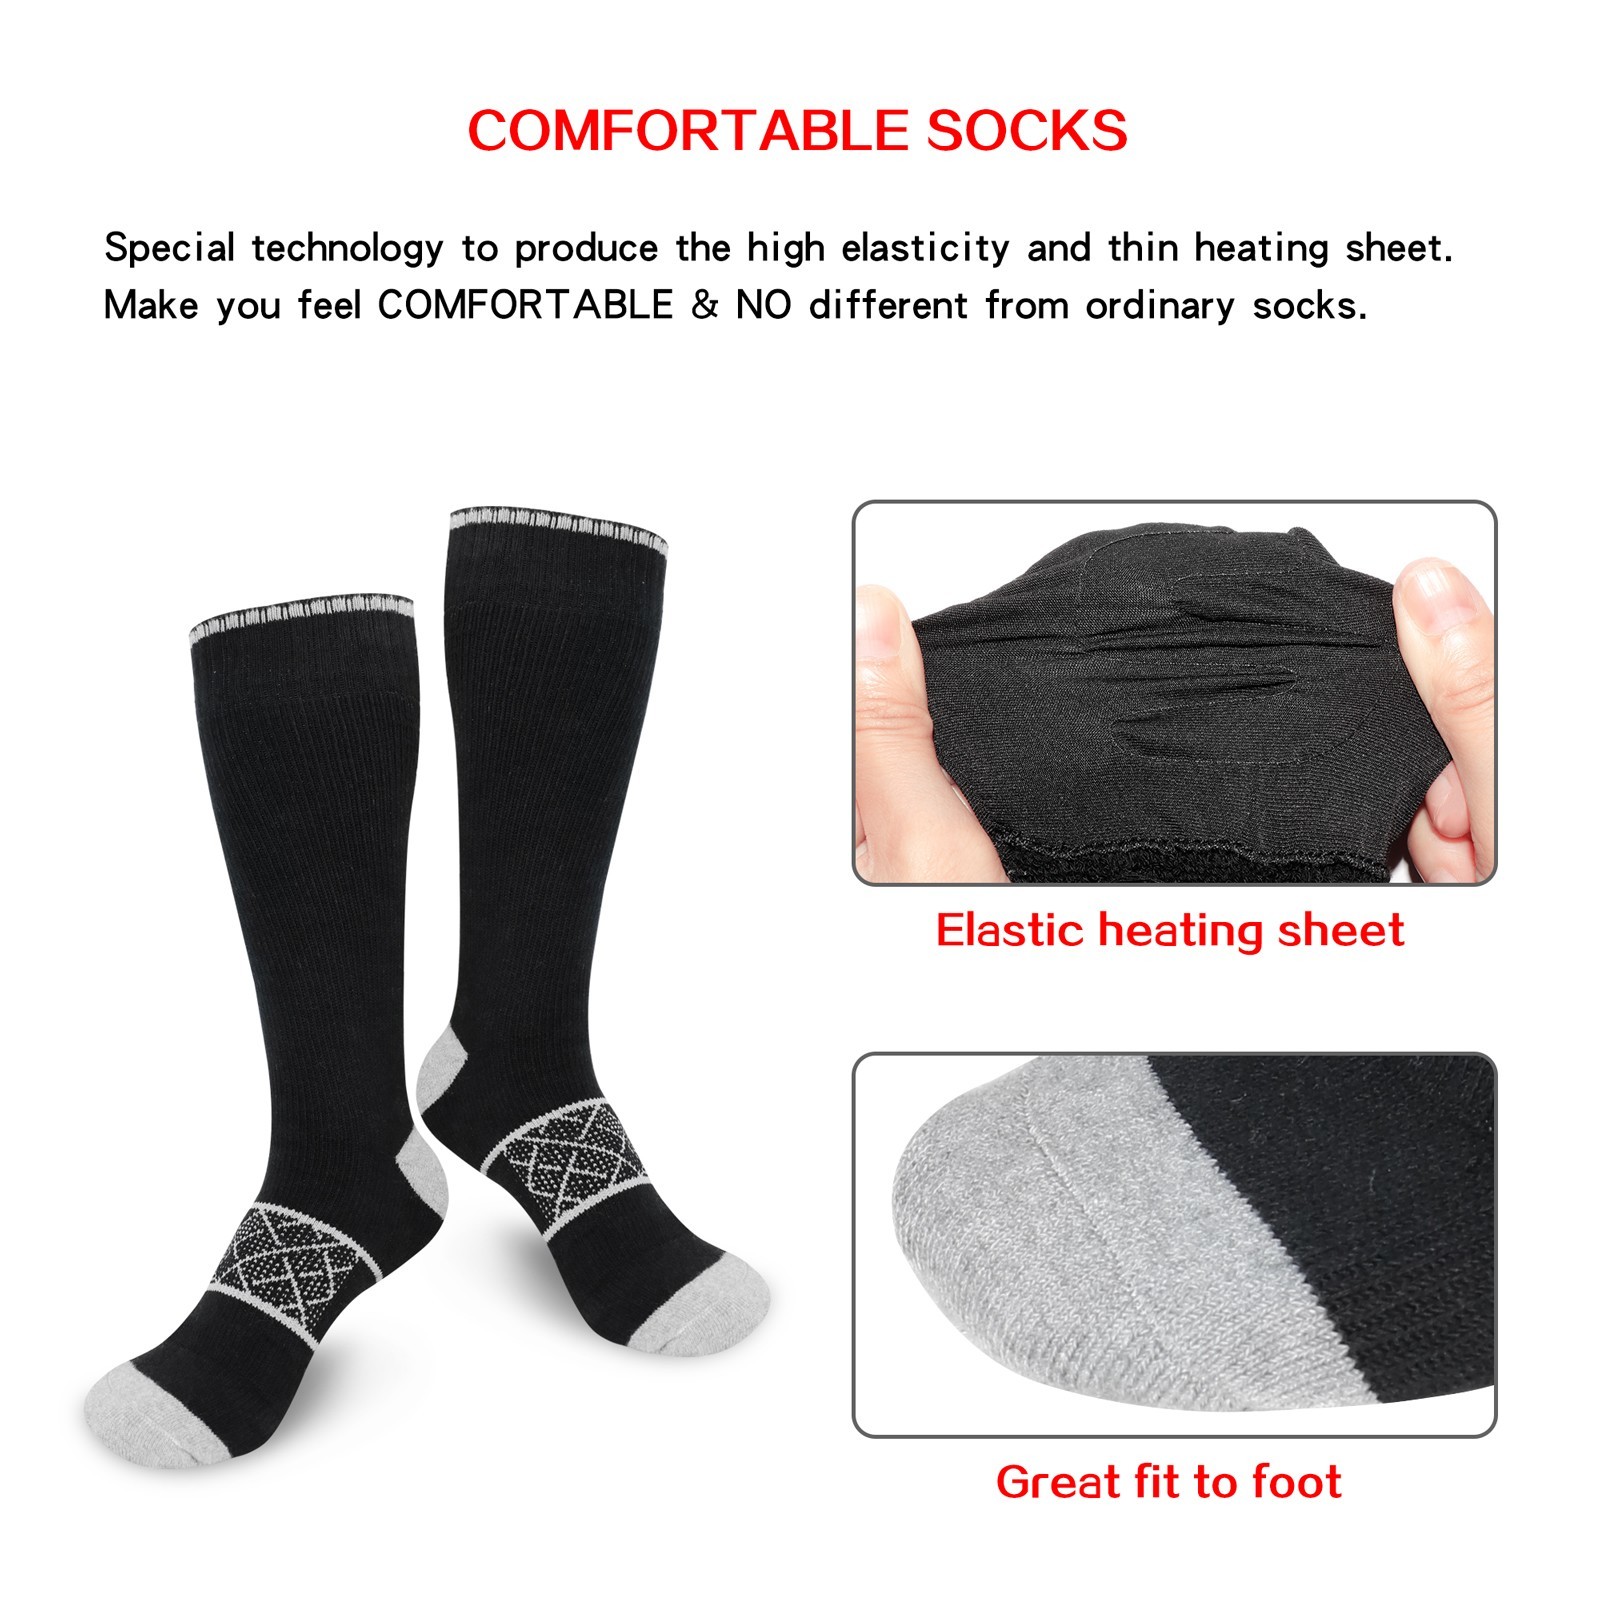 Dr. Warm warm battery operated socks with prined pattern for indoor use